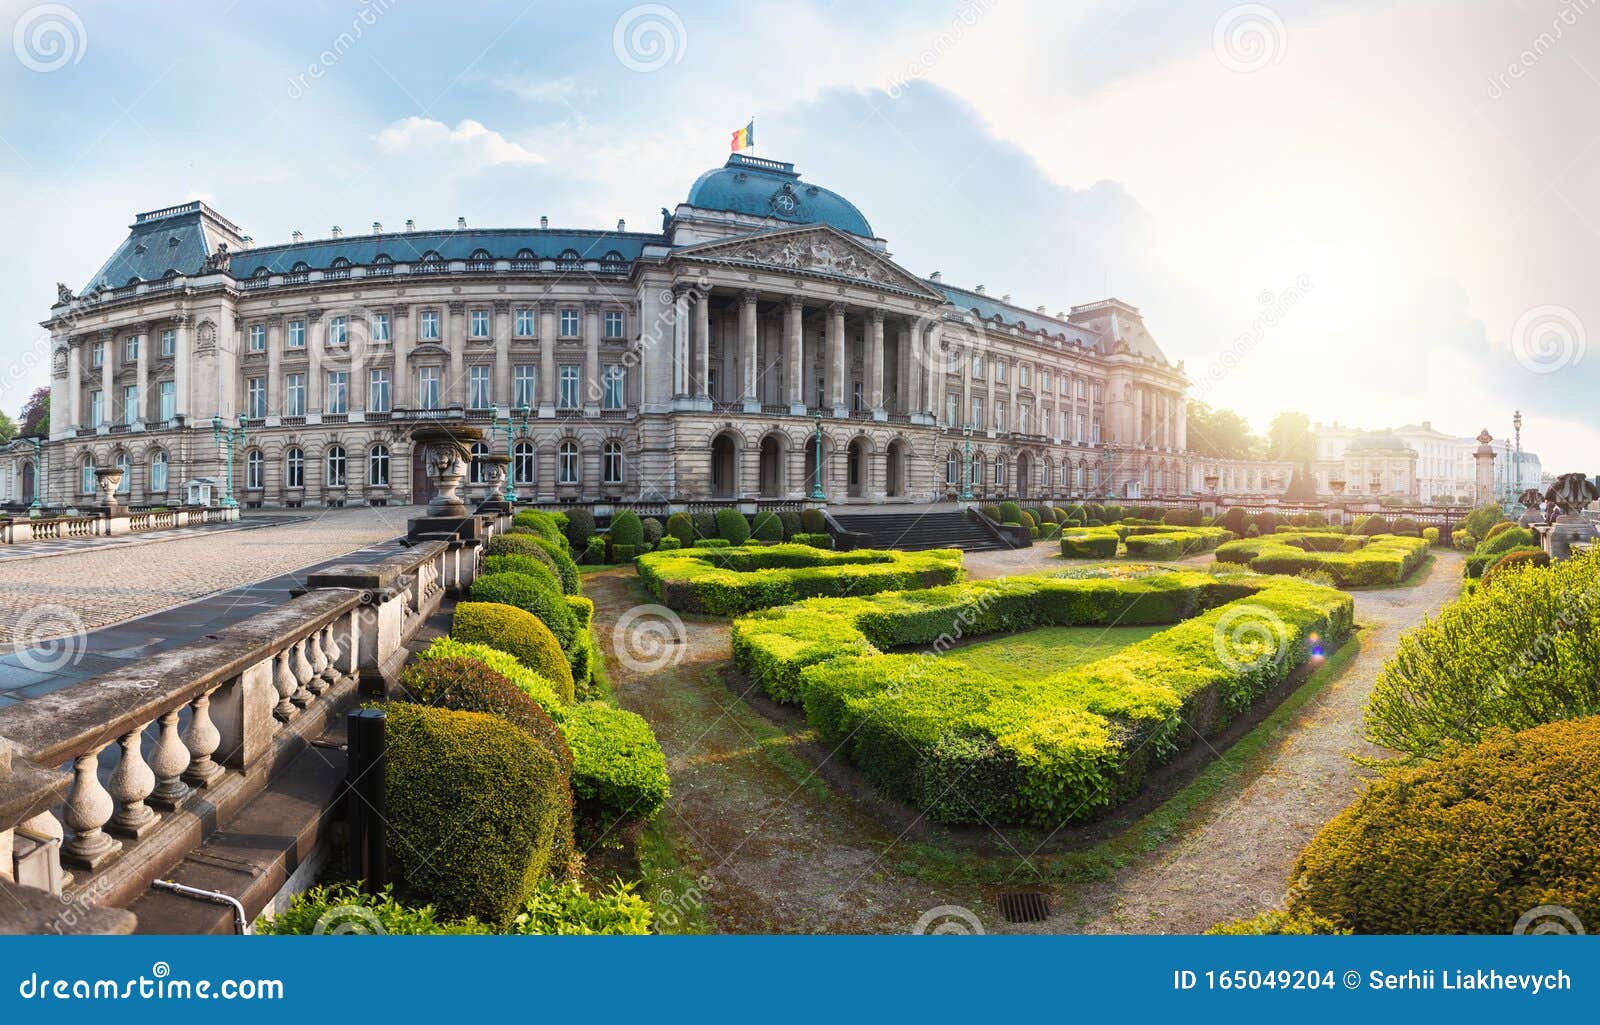 Brussels At Sunset, Brussels, Belgium Stock Photo - Image 